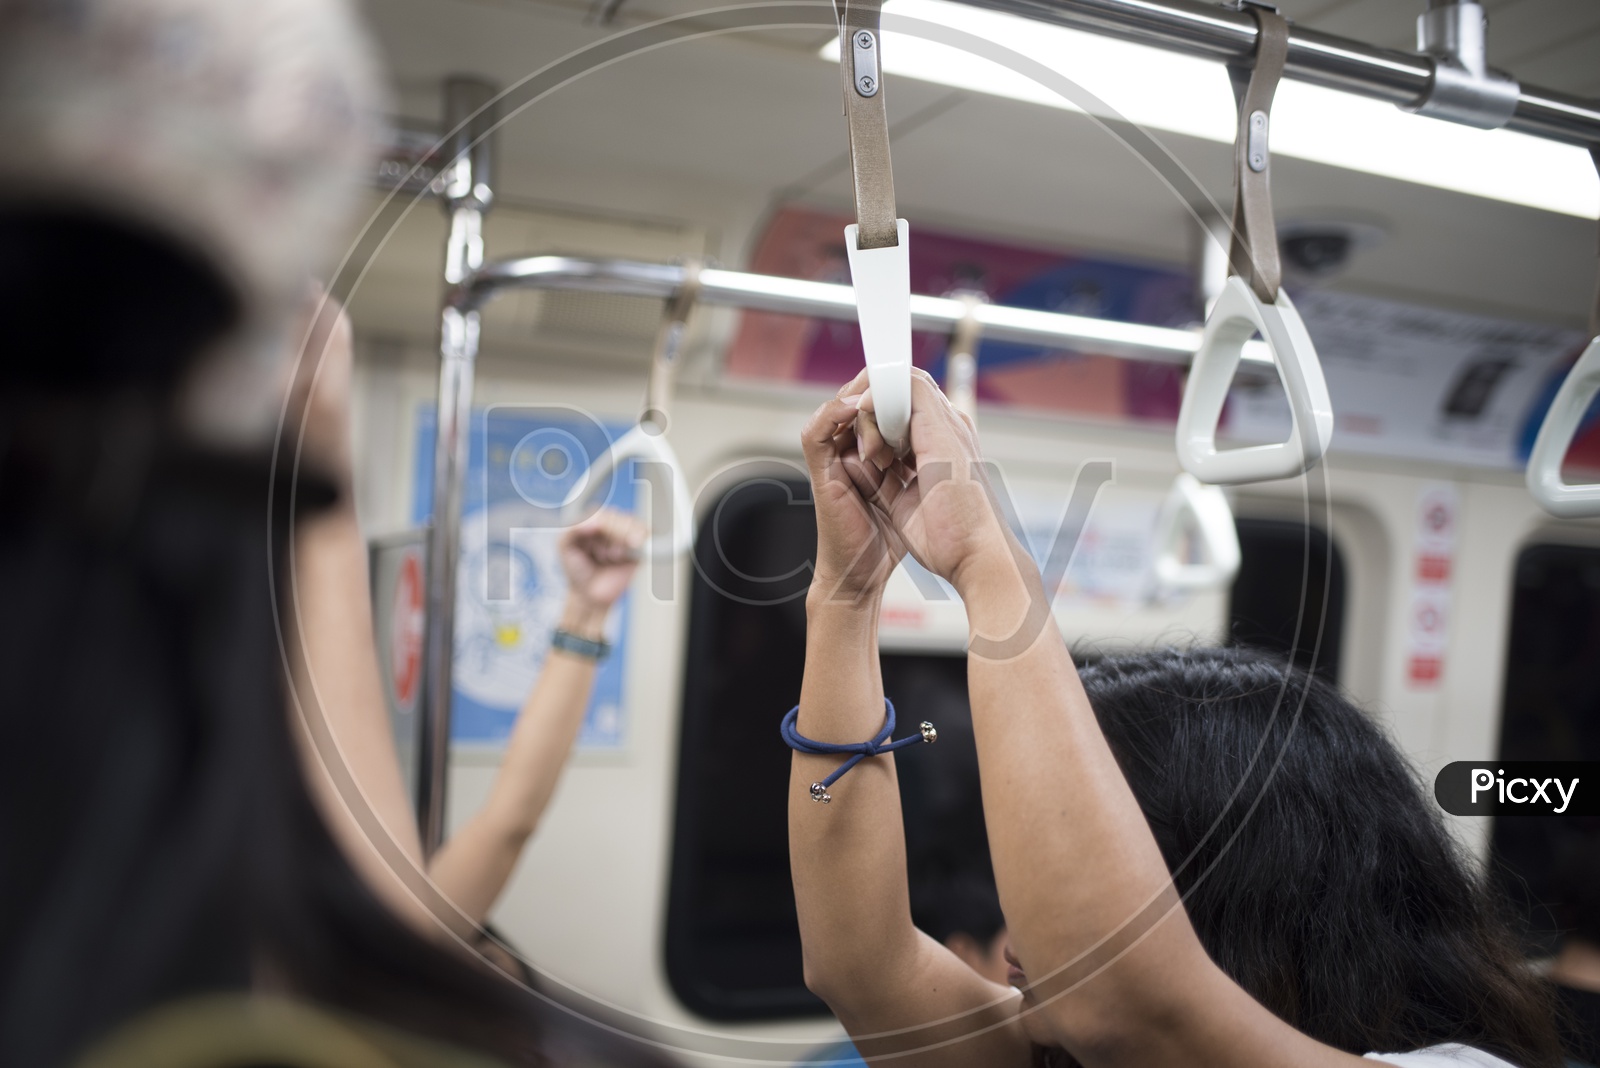 Commuters Hands Holding Support Handle bars in train